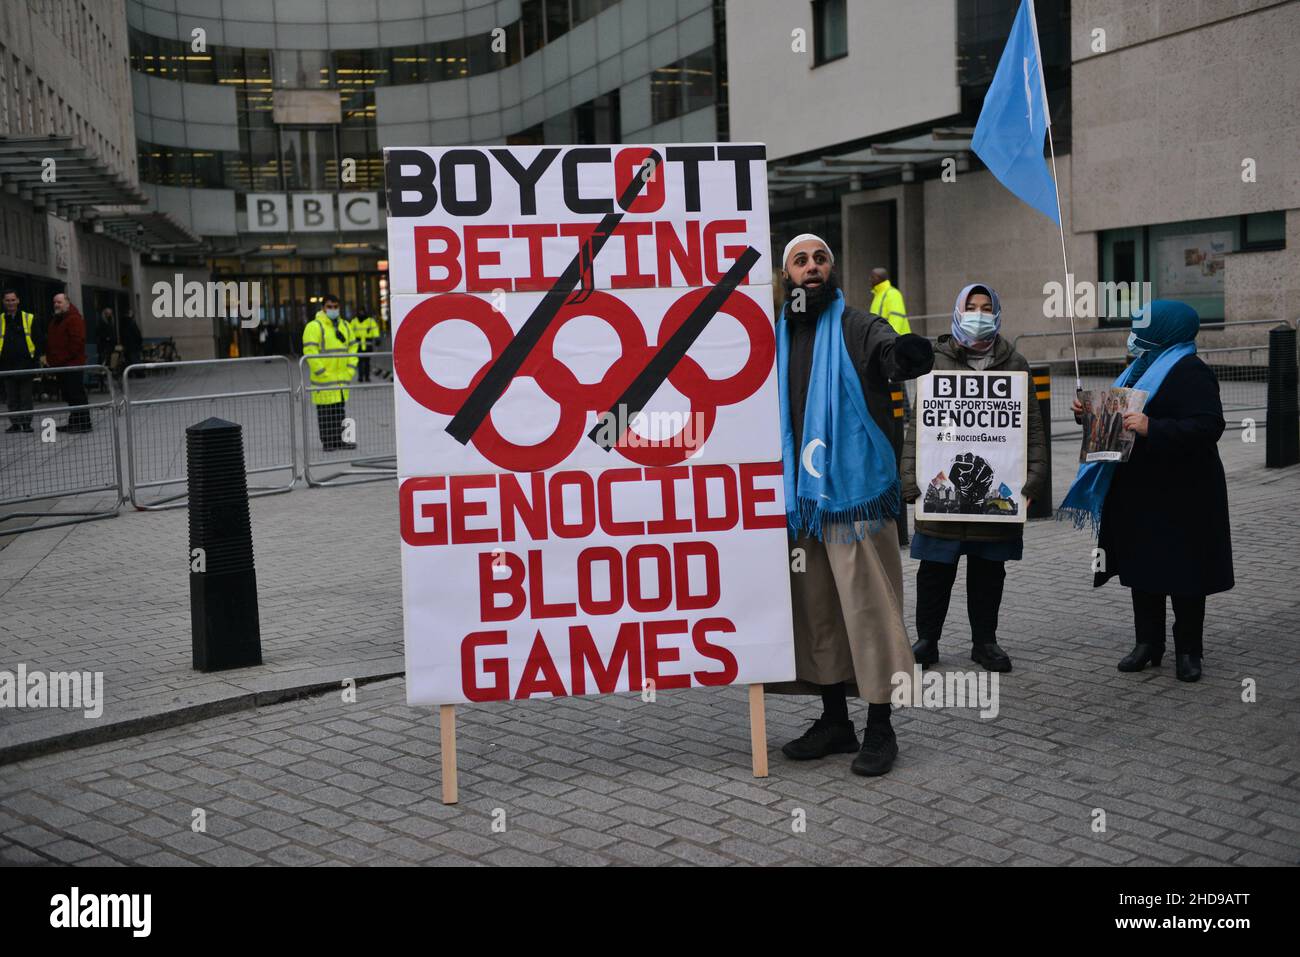 Supporters of Tibet, Hongkong, Uyghurs and Anti-CCP activists gathered opposite BBC Broadcasting House in London to call out BBC to boycott Beijing 2022 Olympic Games. Stock Photo